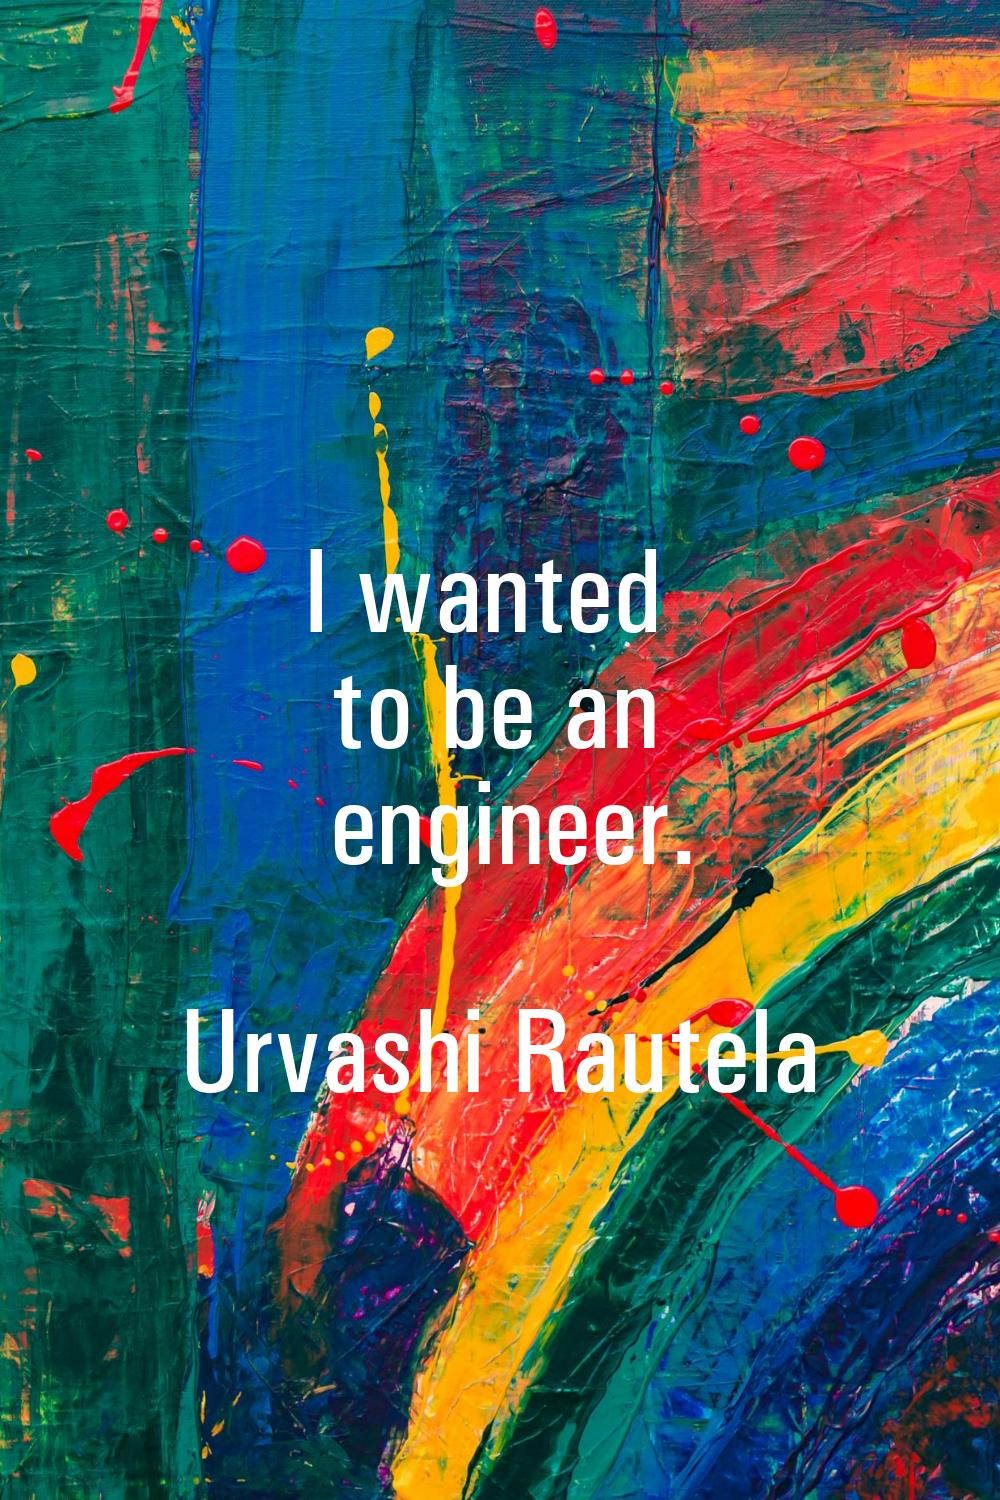 I wanted to be an engineer.